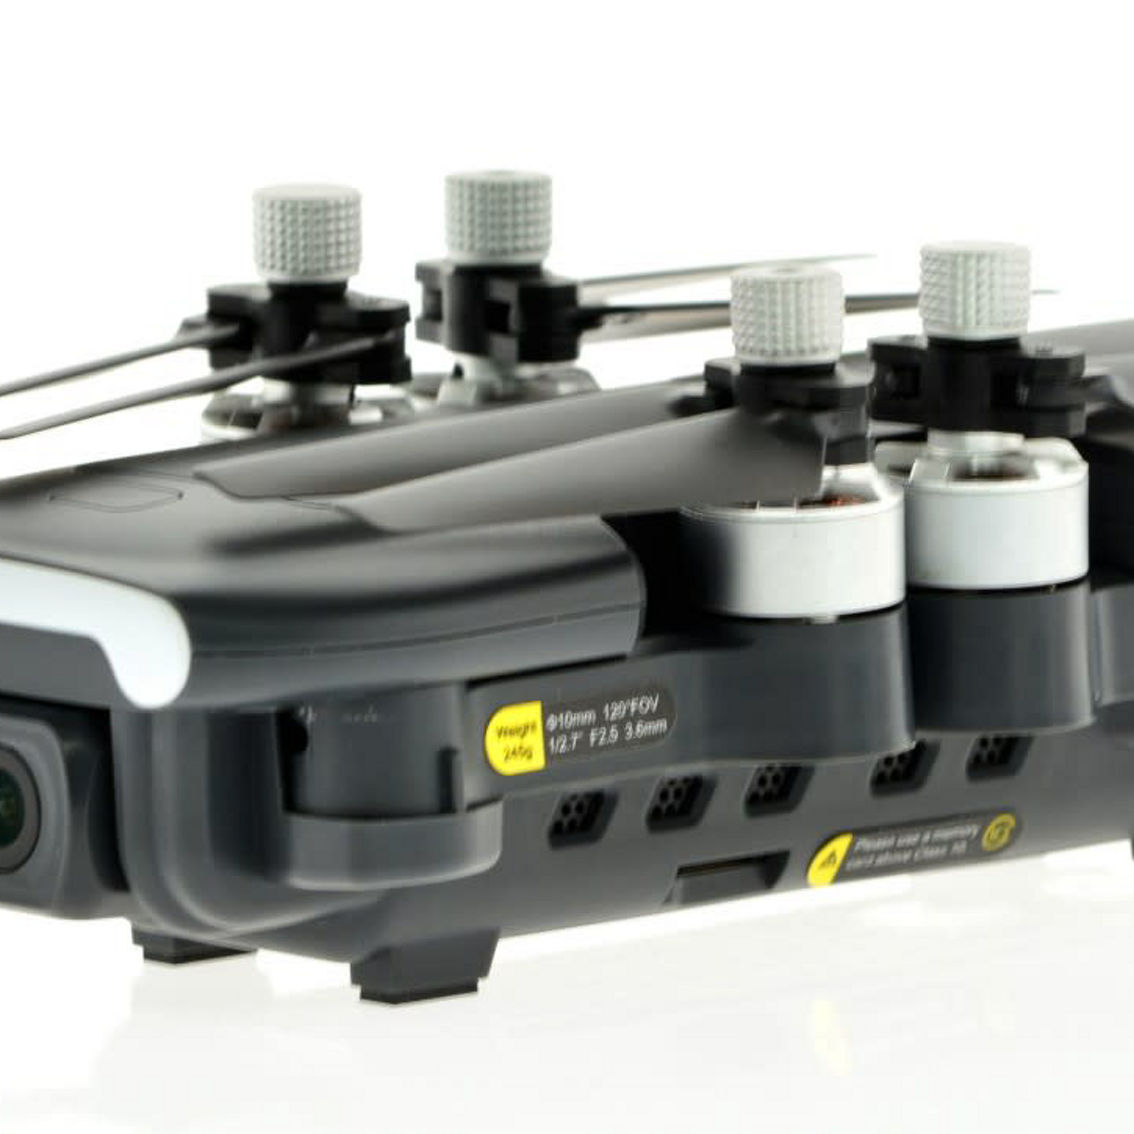 CIS-B7W-4K small GPS foldable drone with 4k camera - Image 4 of 5